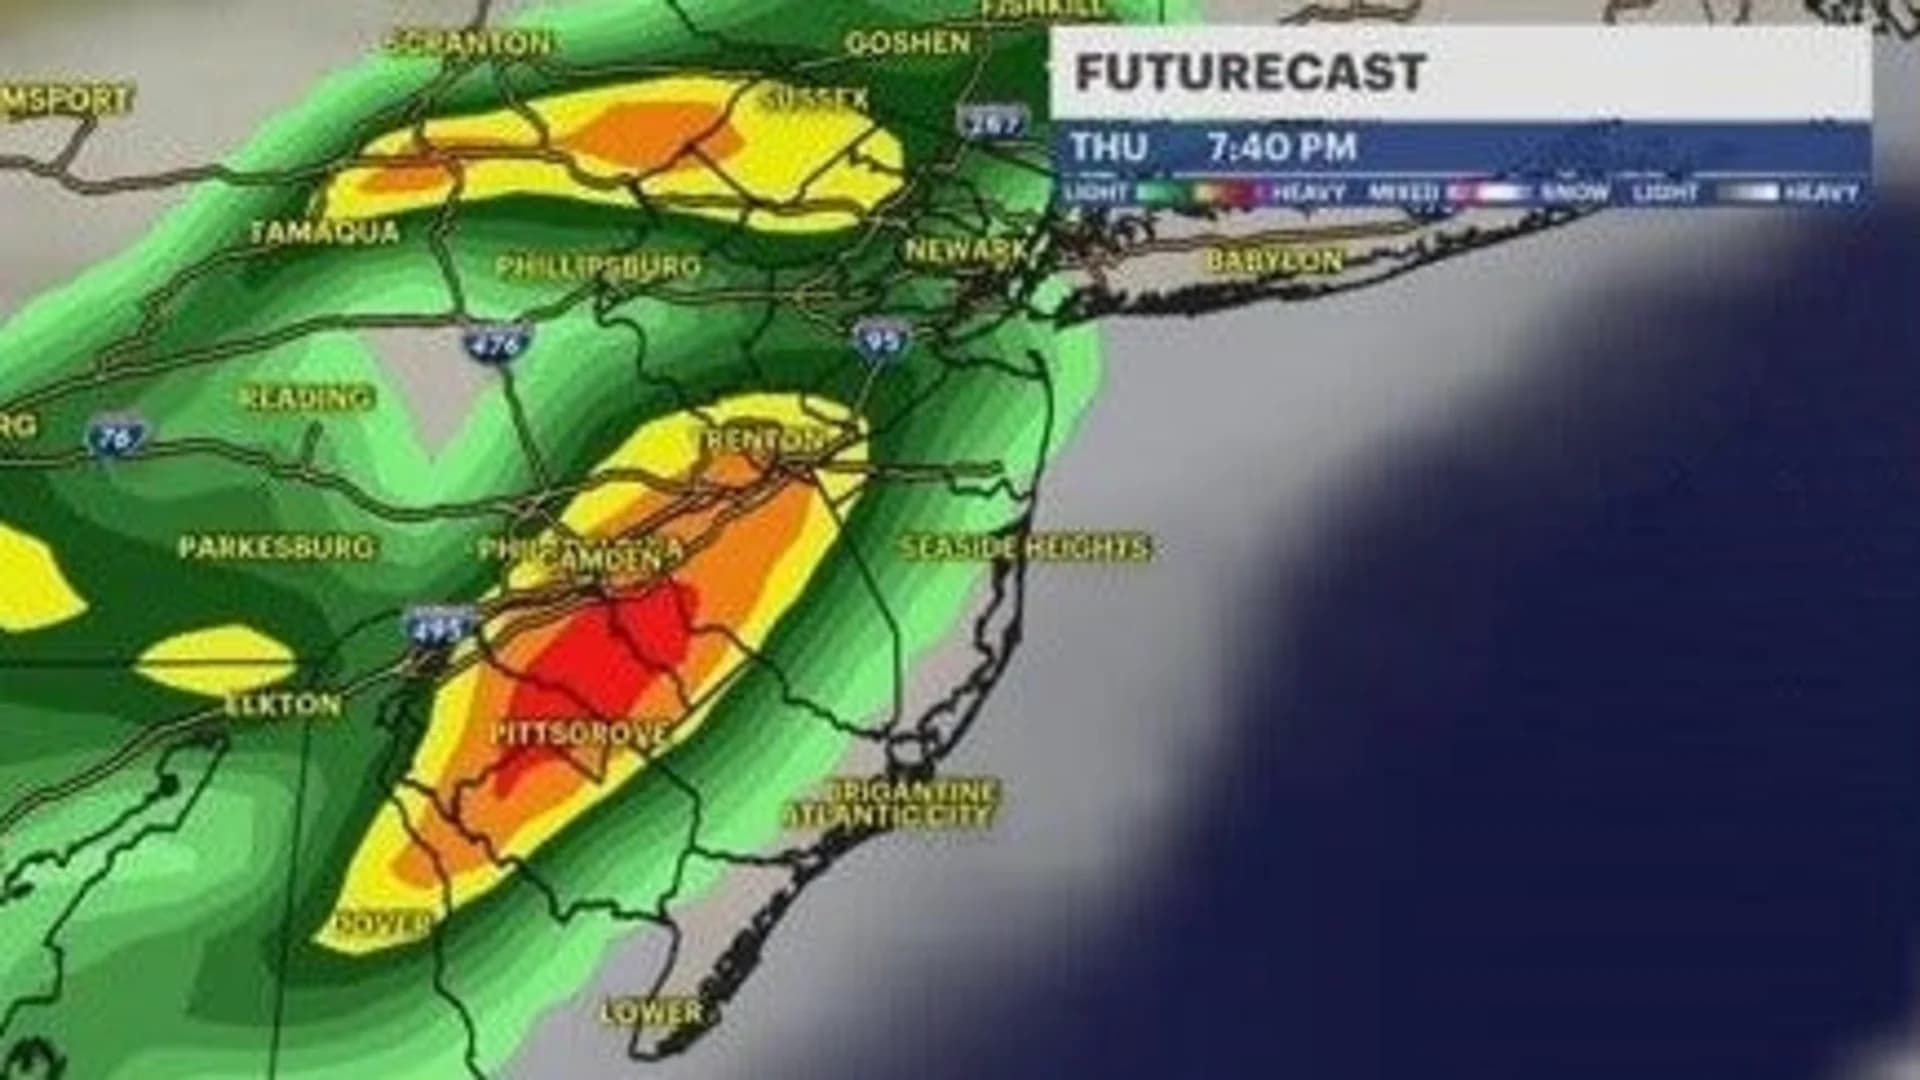 Powerful storms Thursday evening bring potential of heavy rain, damaging winds